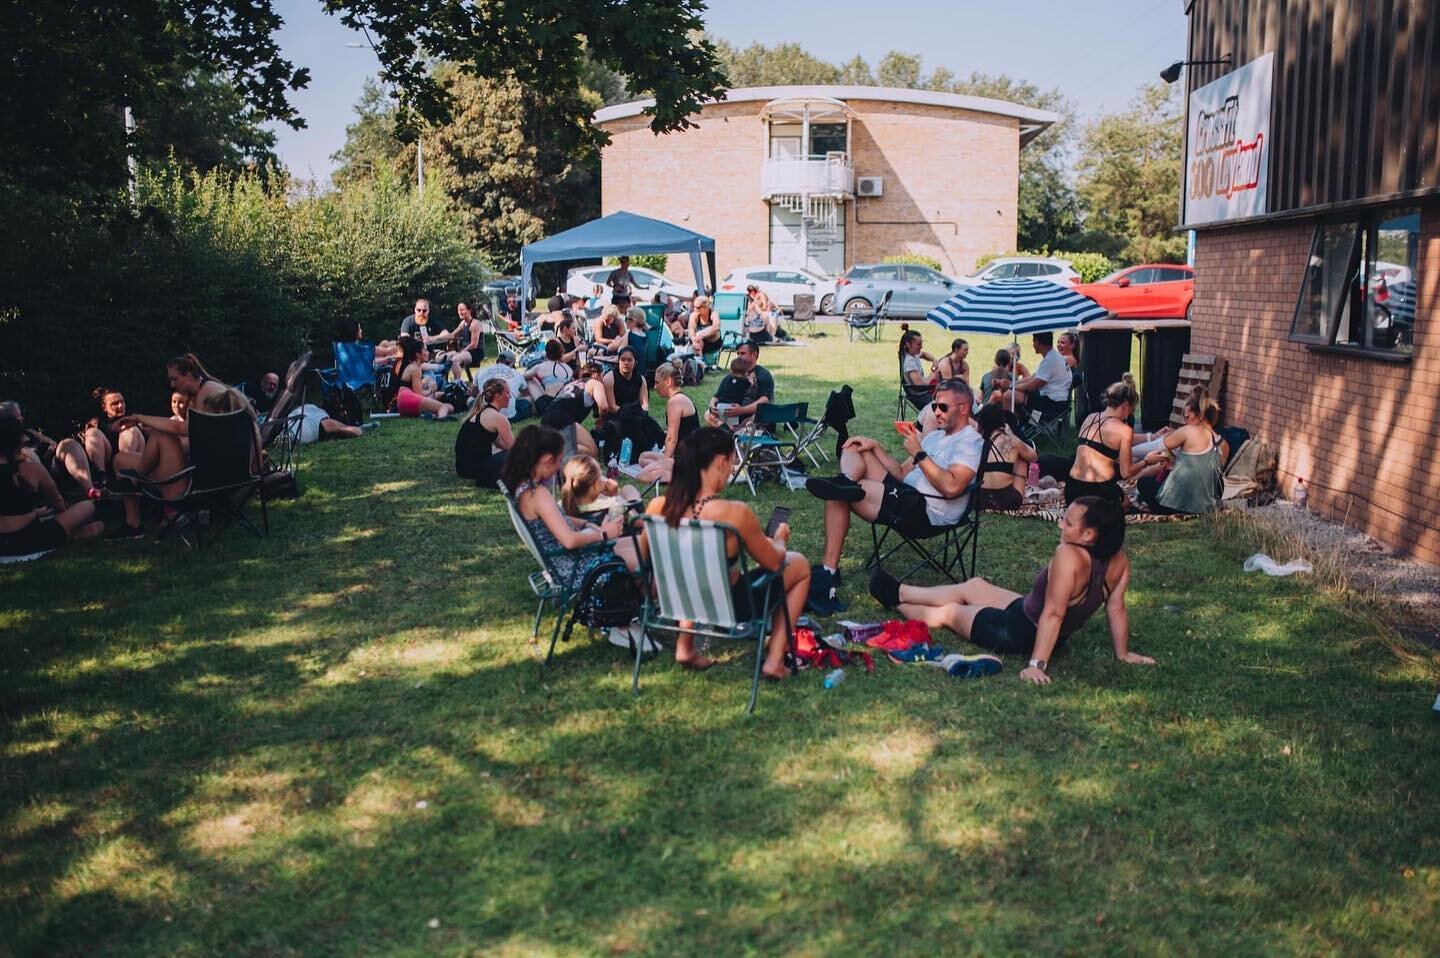 We have our fingers crossed for good weather next Saturday for our Summer Charity Event 🤞 ⁣
⁣
Bring deck chairs, picnic blankets and anything else you can think to enjoy a great night listening to live music, eating great food and staying out until 